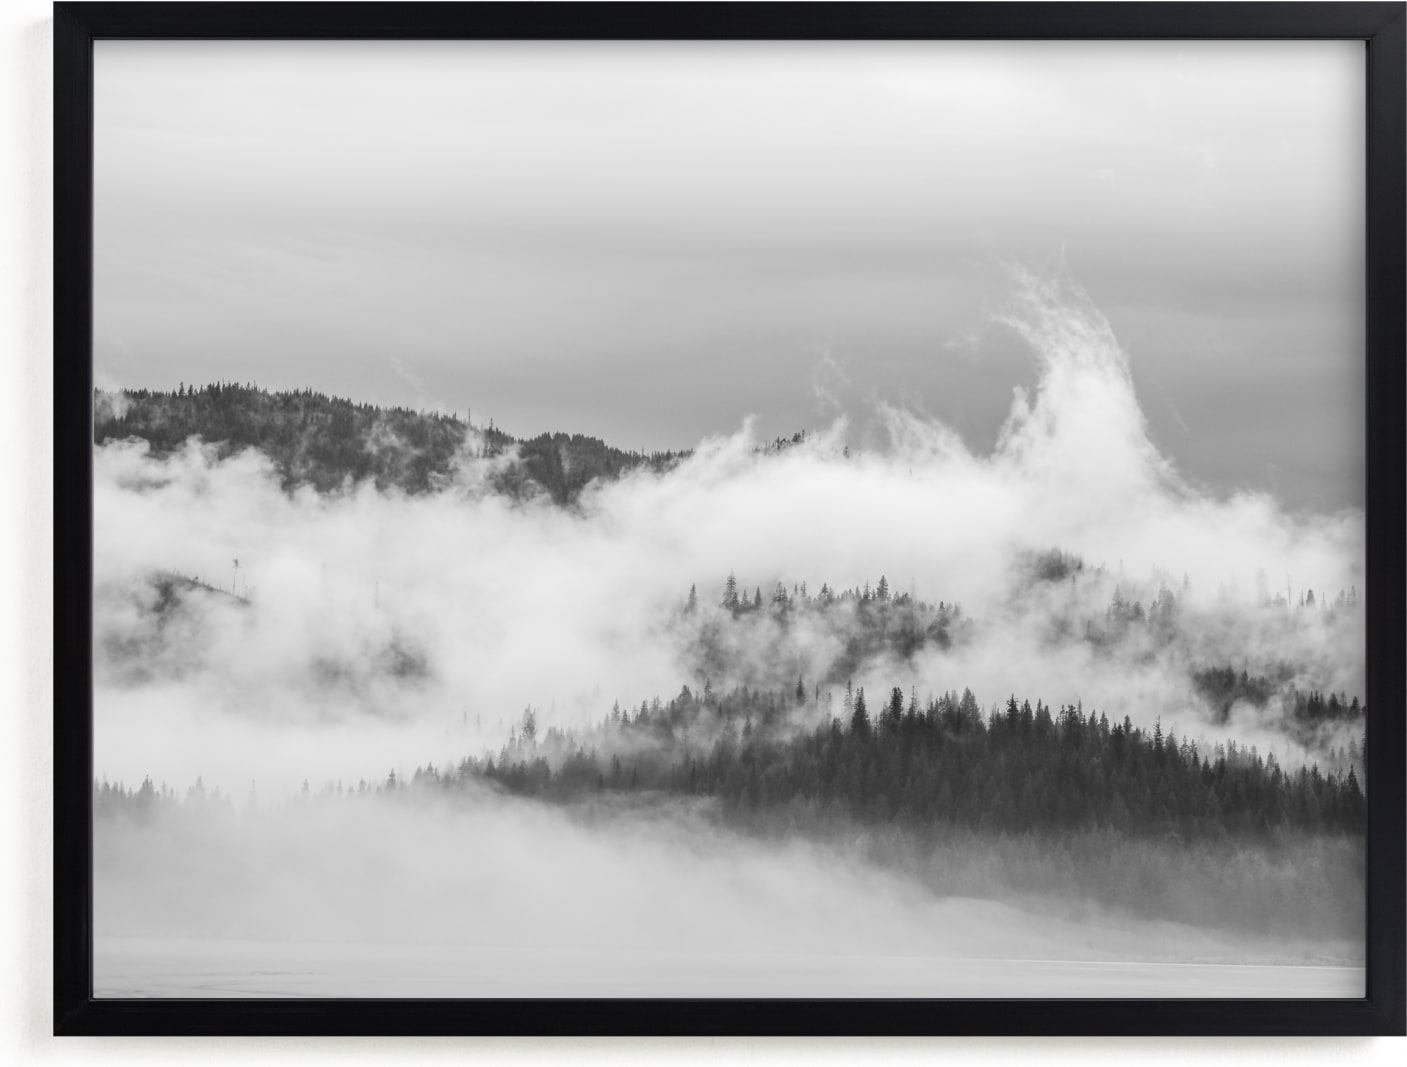 This is a grey art by Jennifer Bush called Misty Eye of the Mountain.